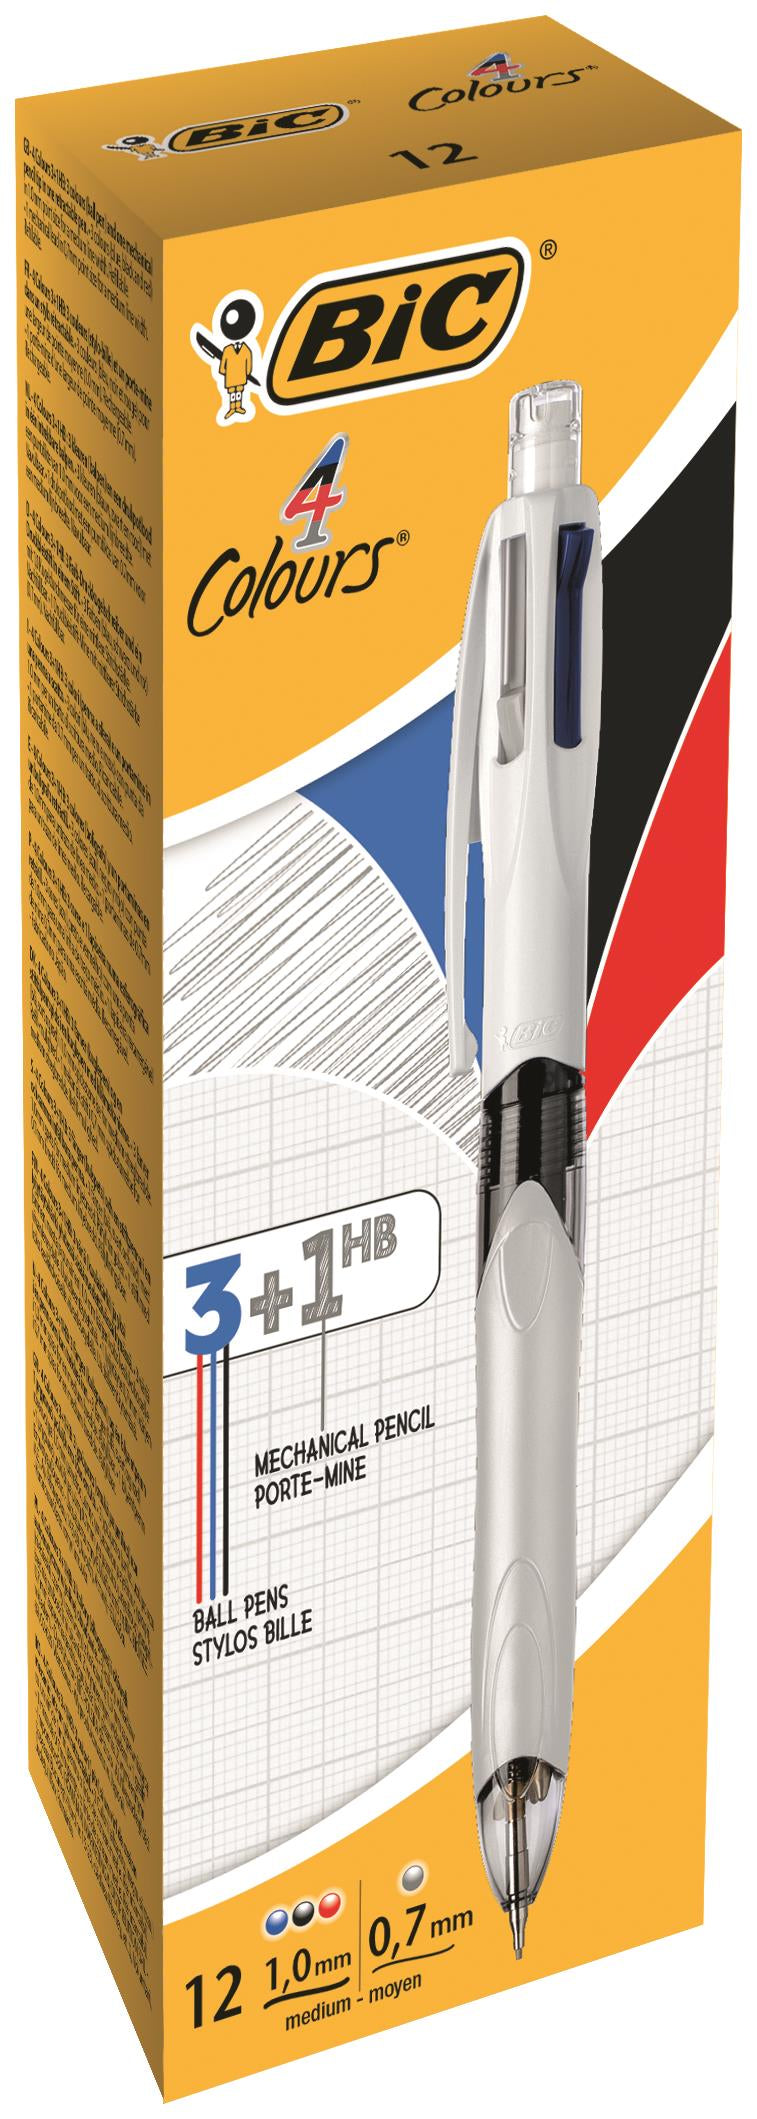 Bic 4 Colours Multifunction Ballpoint Pen and Pencil 1mm Tip 0.32mm Line and 0.7mm Lead Silver/White Barrel Black/Blue/Red/Pencil (Pack 12)